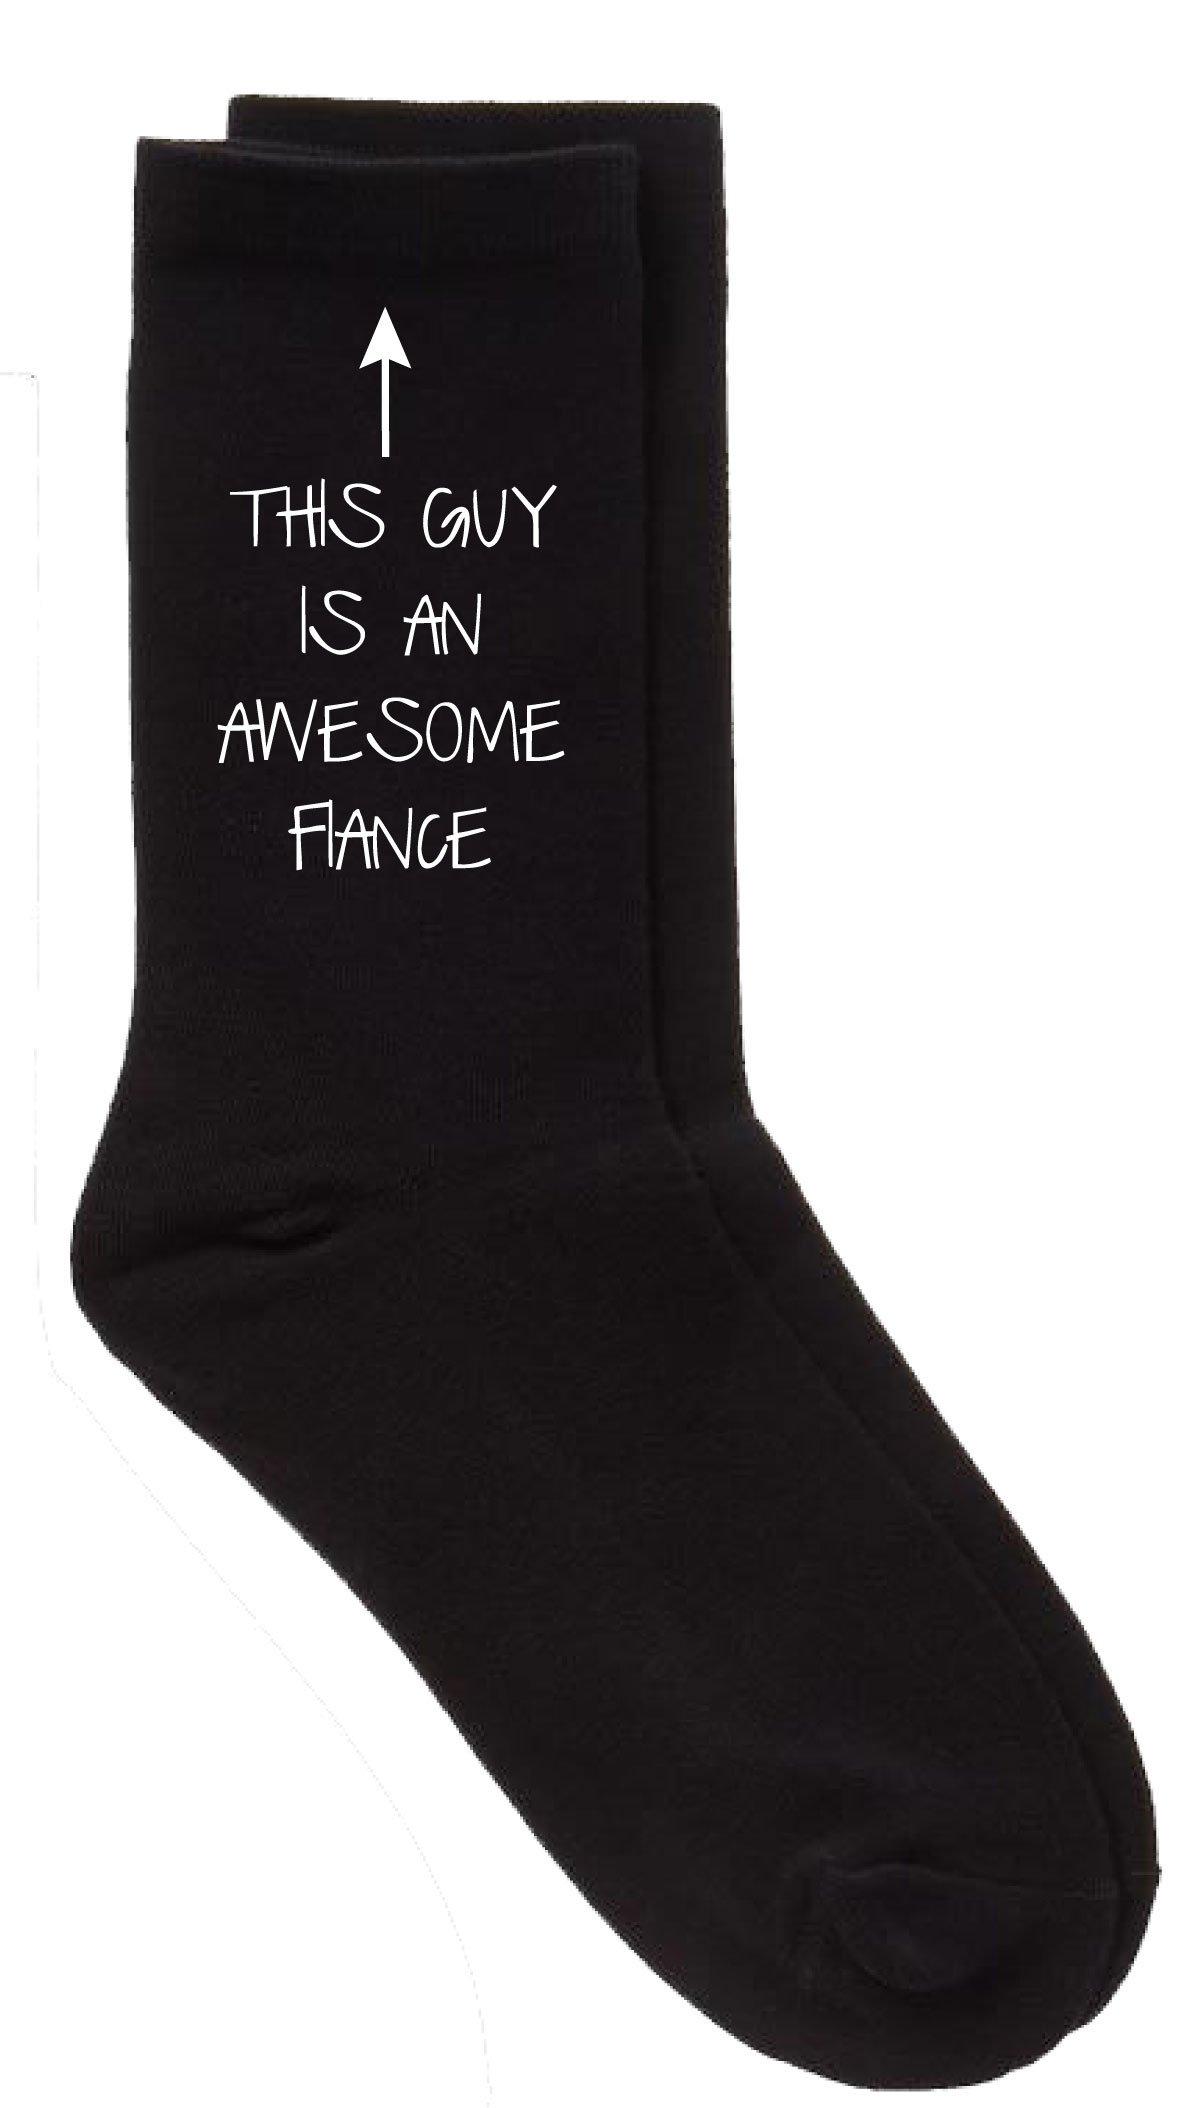 This Guy Is An Awesome Fiance Mens Black Socks